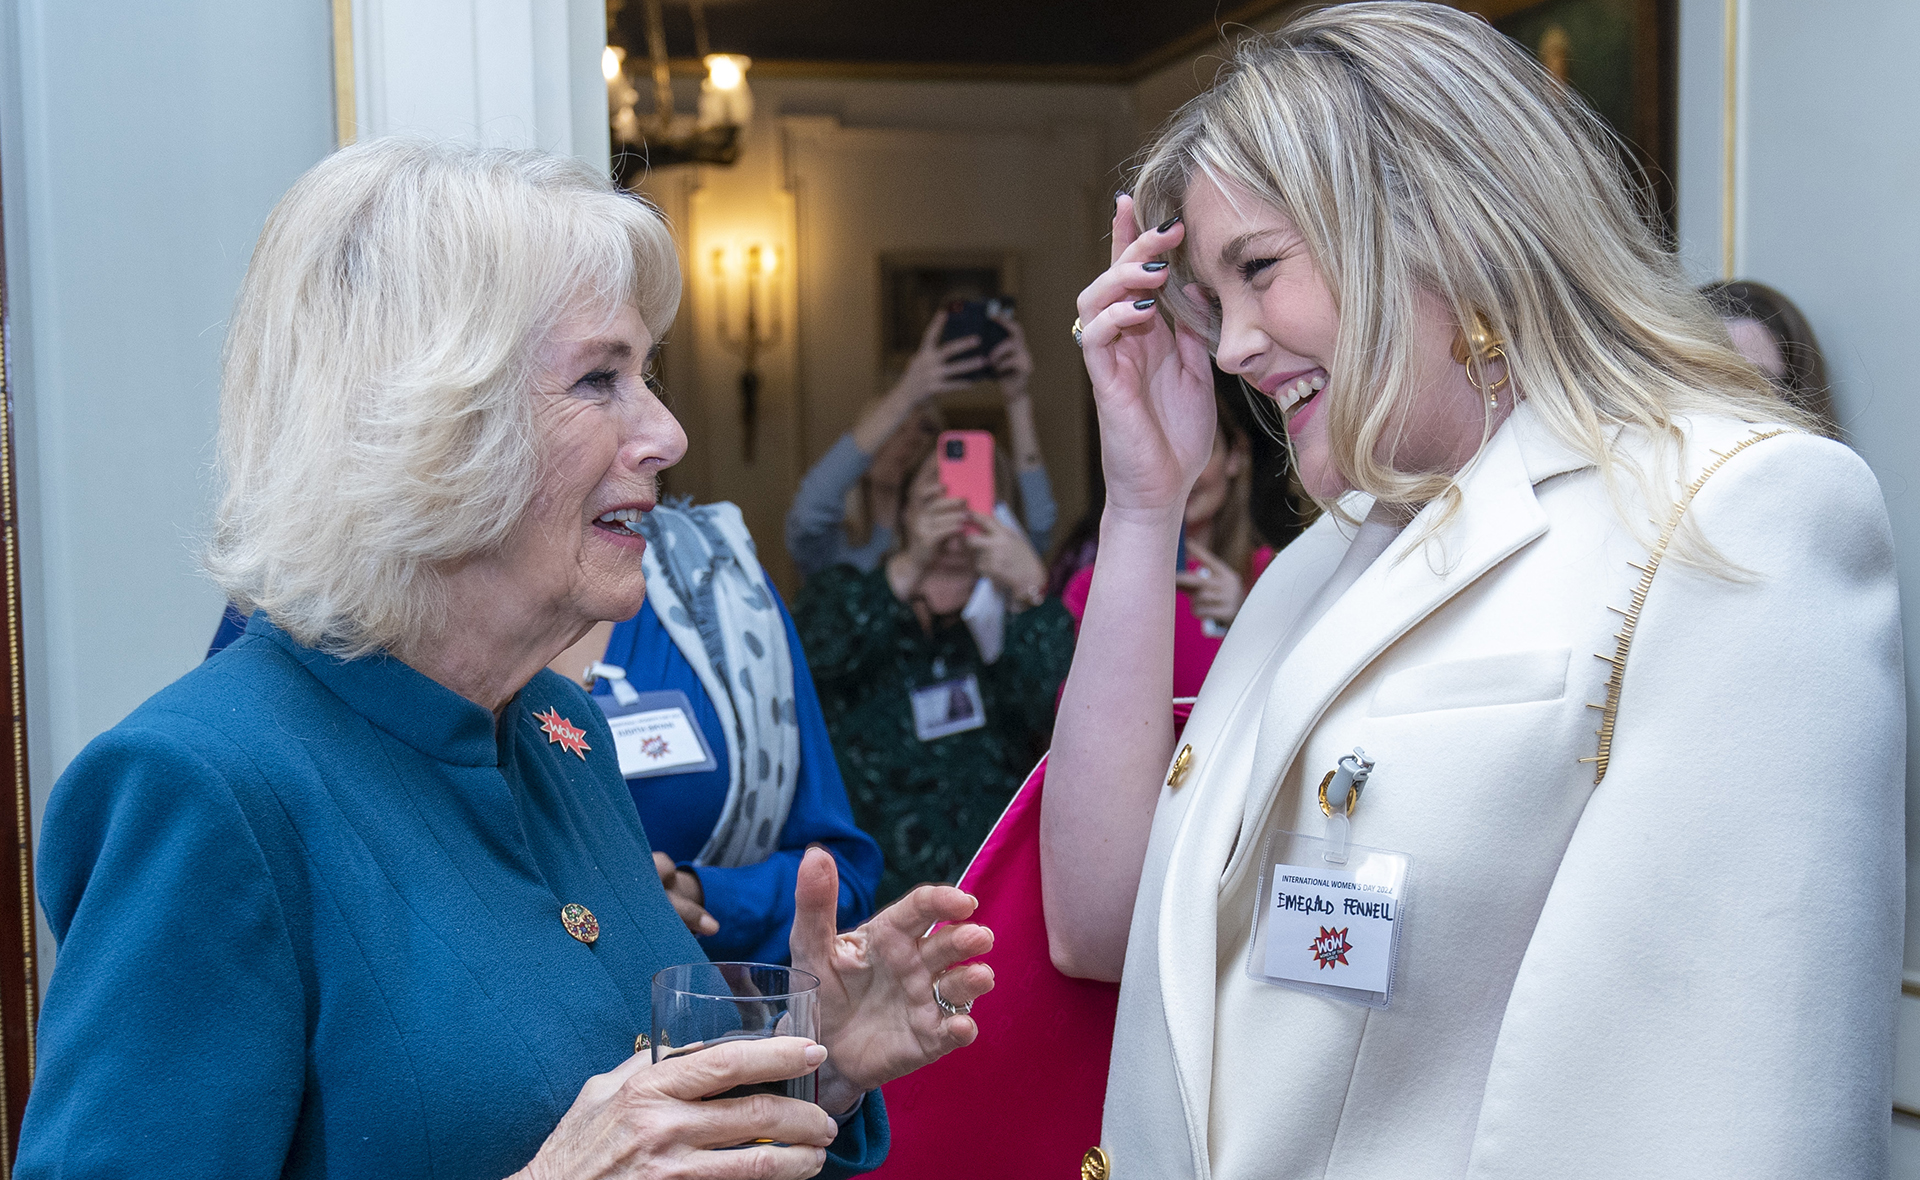 Camilla, Duchess of Cornwall’s unlikely reaction to the actress who plays her on The Crown